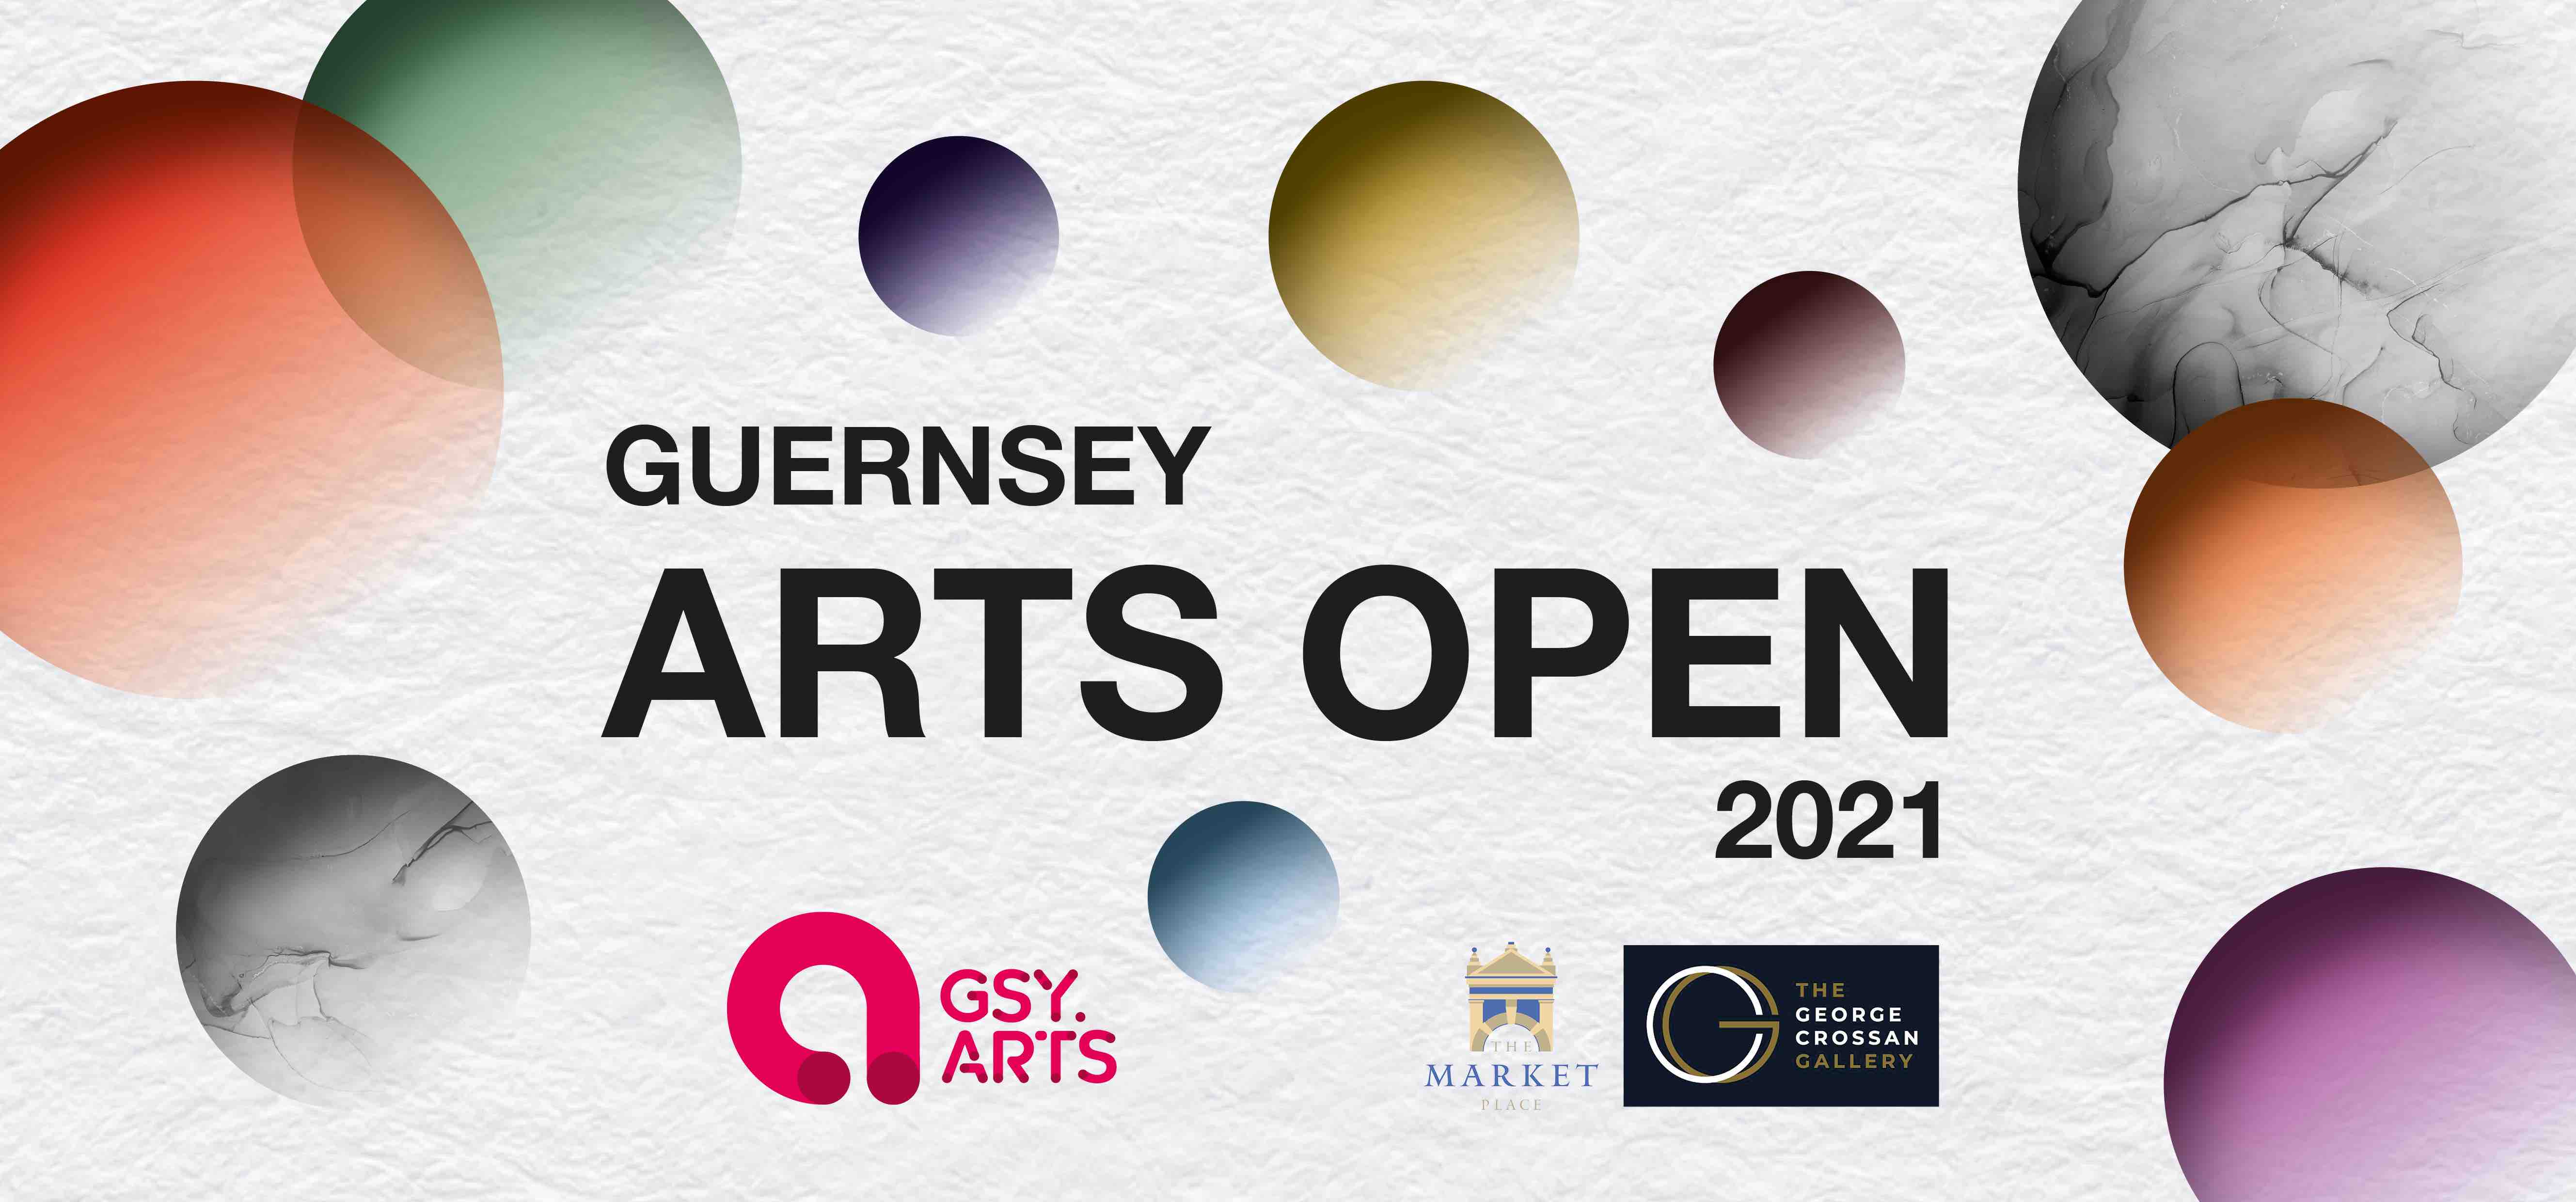 Guernsey Arts Open 2021 - Free to Submit